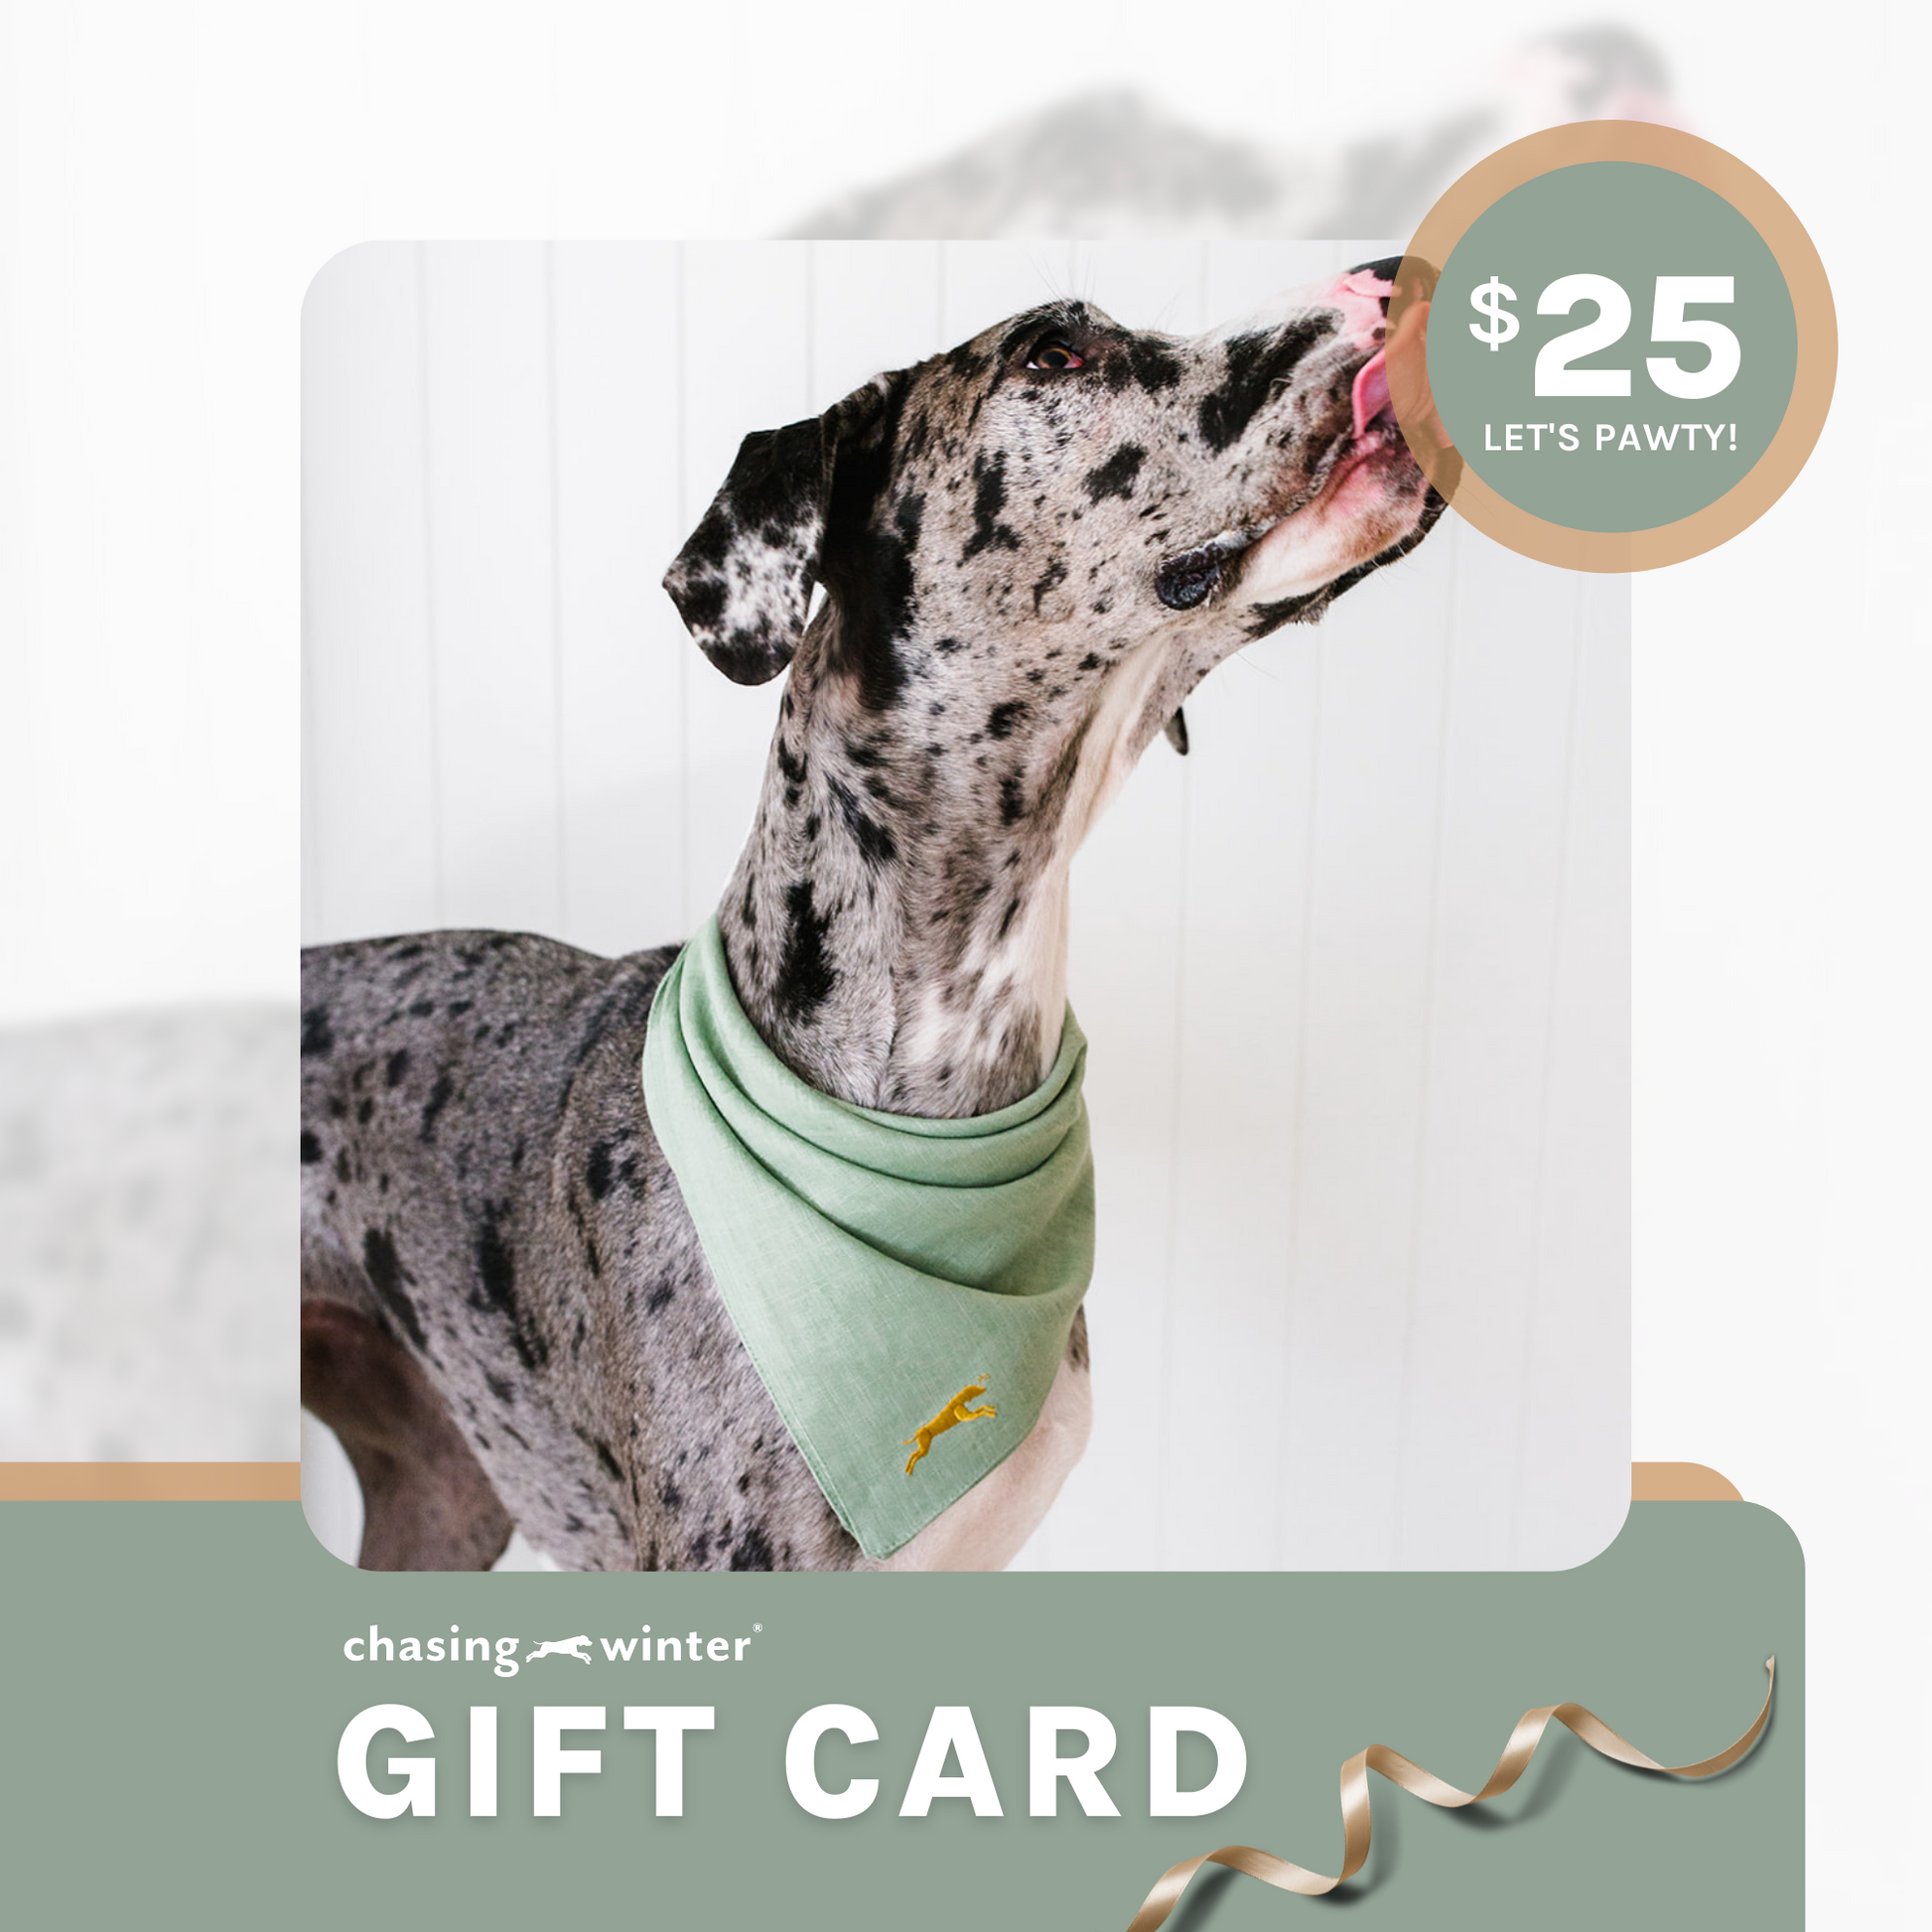 Chasing Winter Gift Card $25